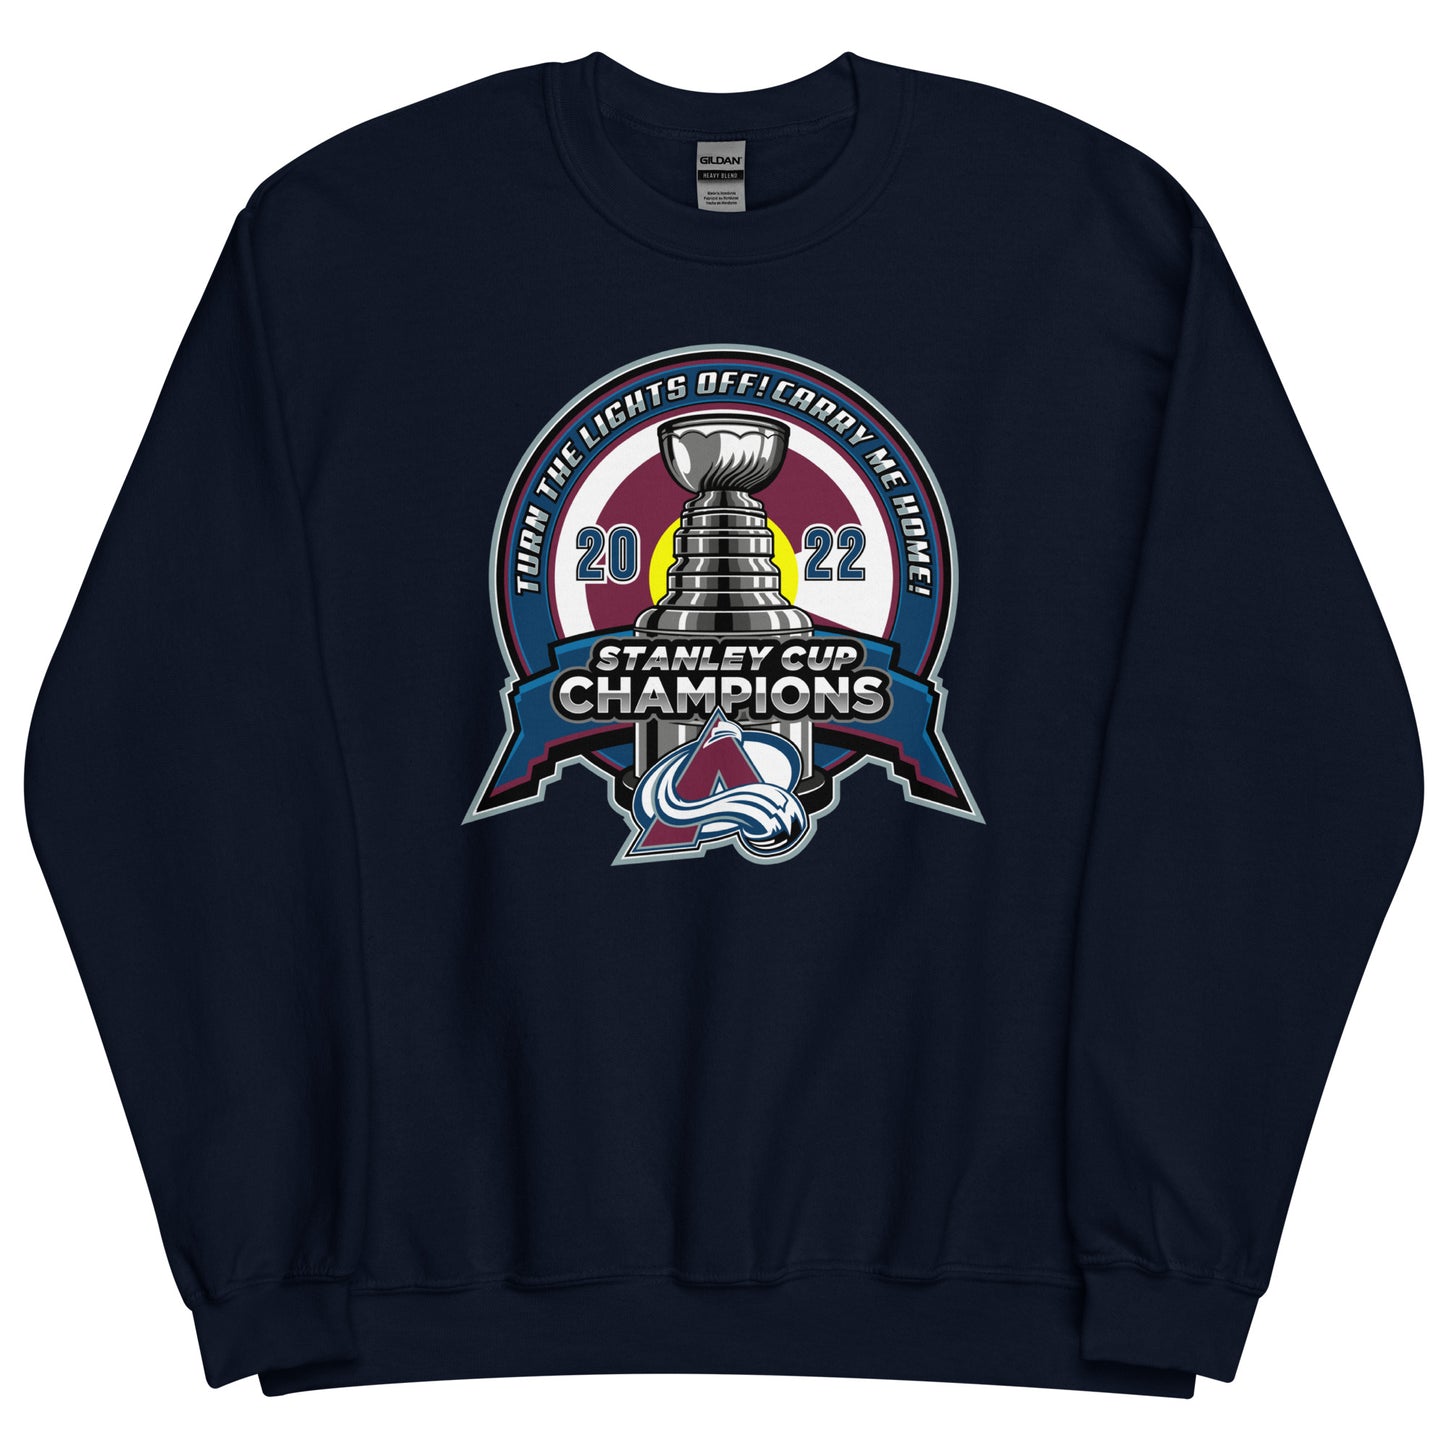 Turn The Lights Off, Carry Me Home Champs Sweatshirt